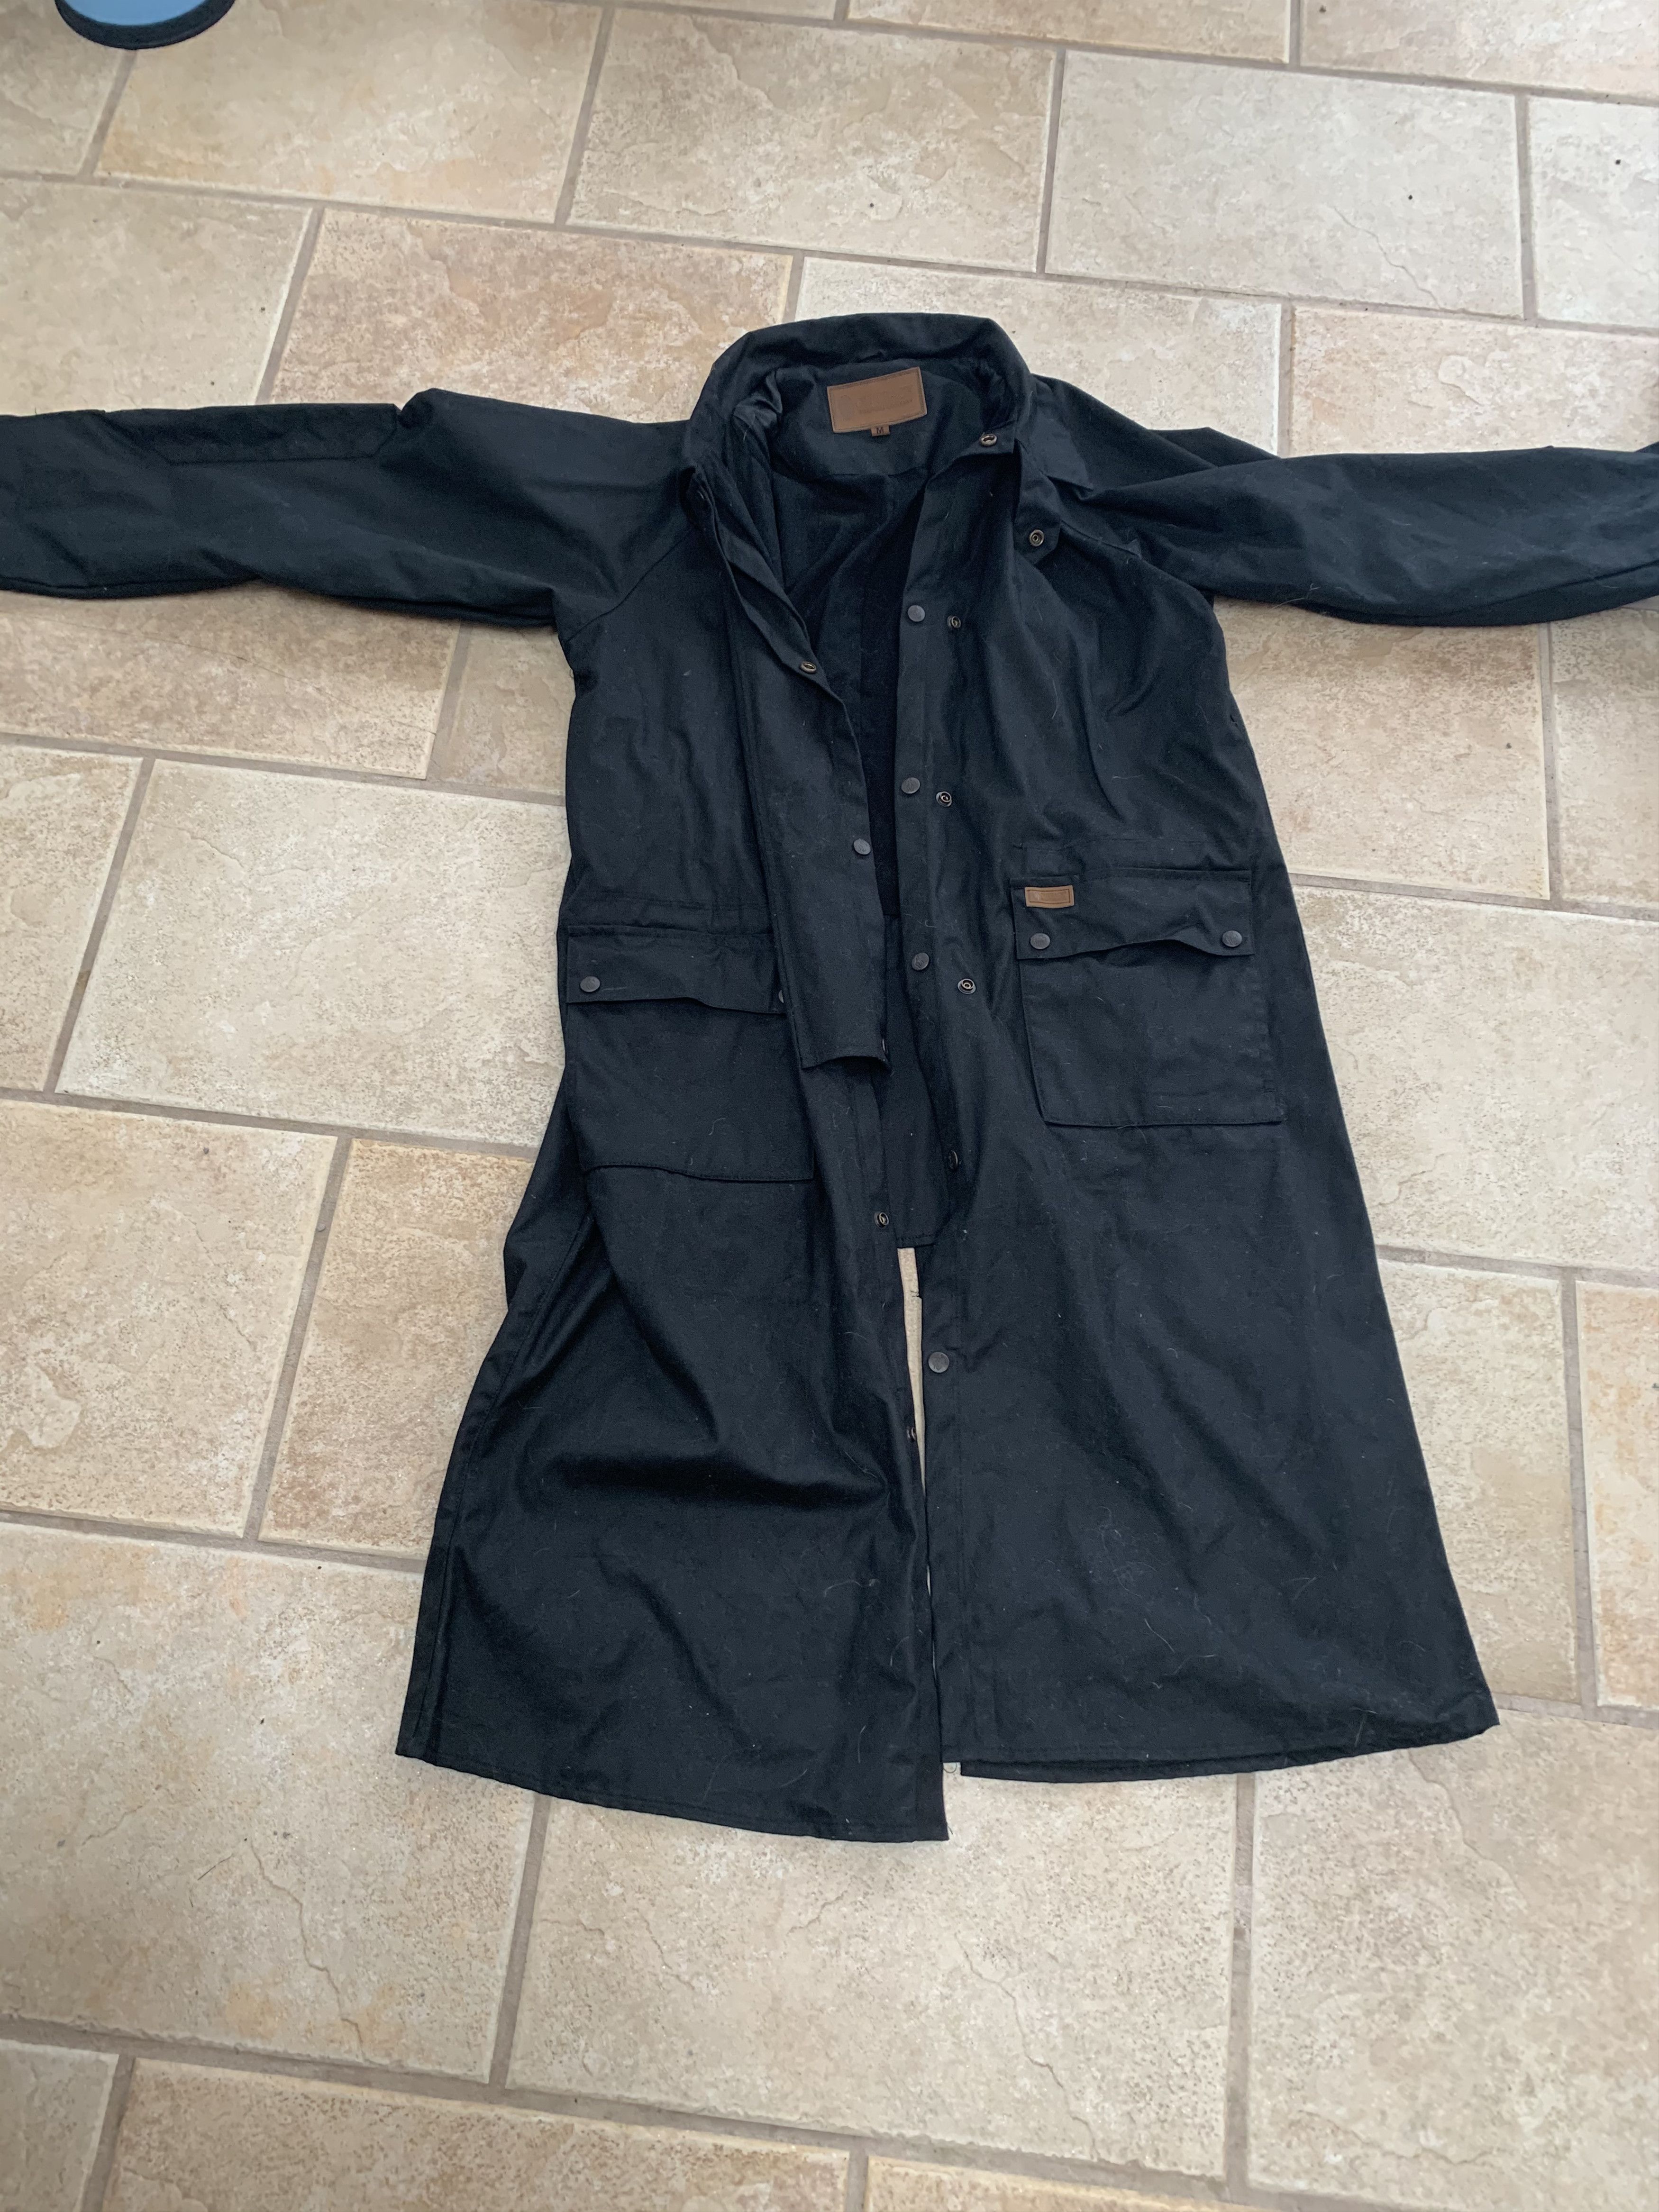 The Australian Outback Collection Outback trading oilskin duster | Grailed